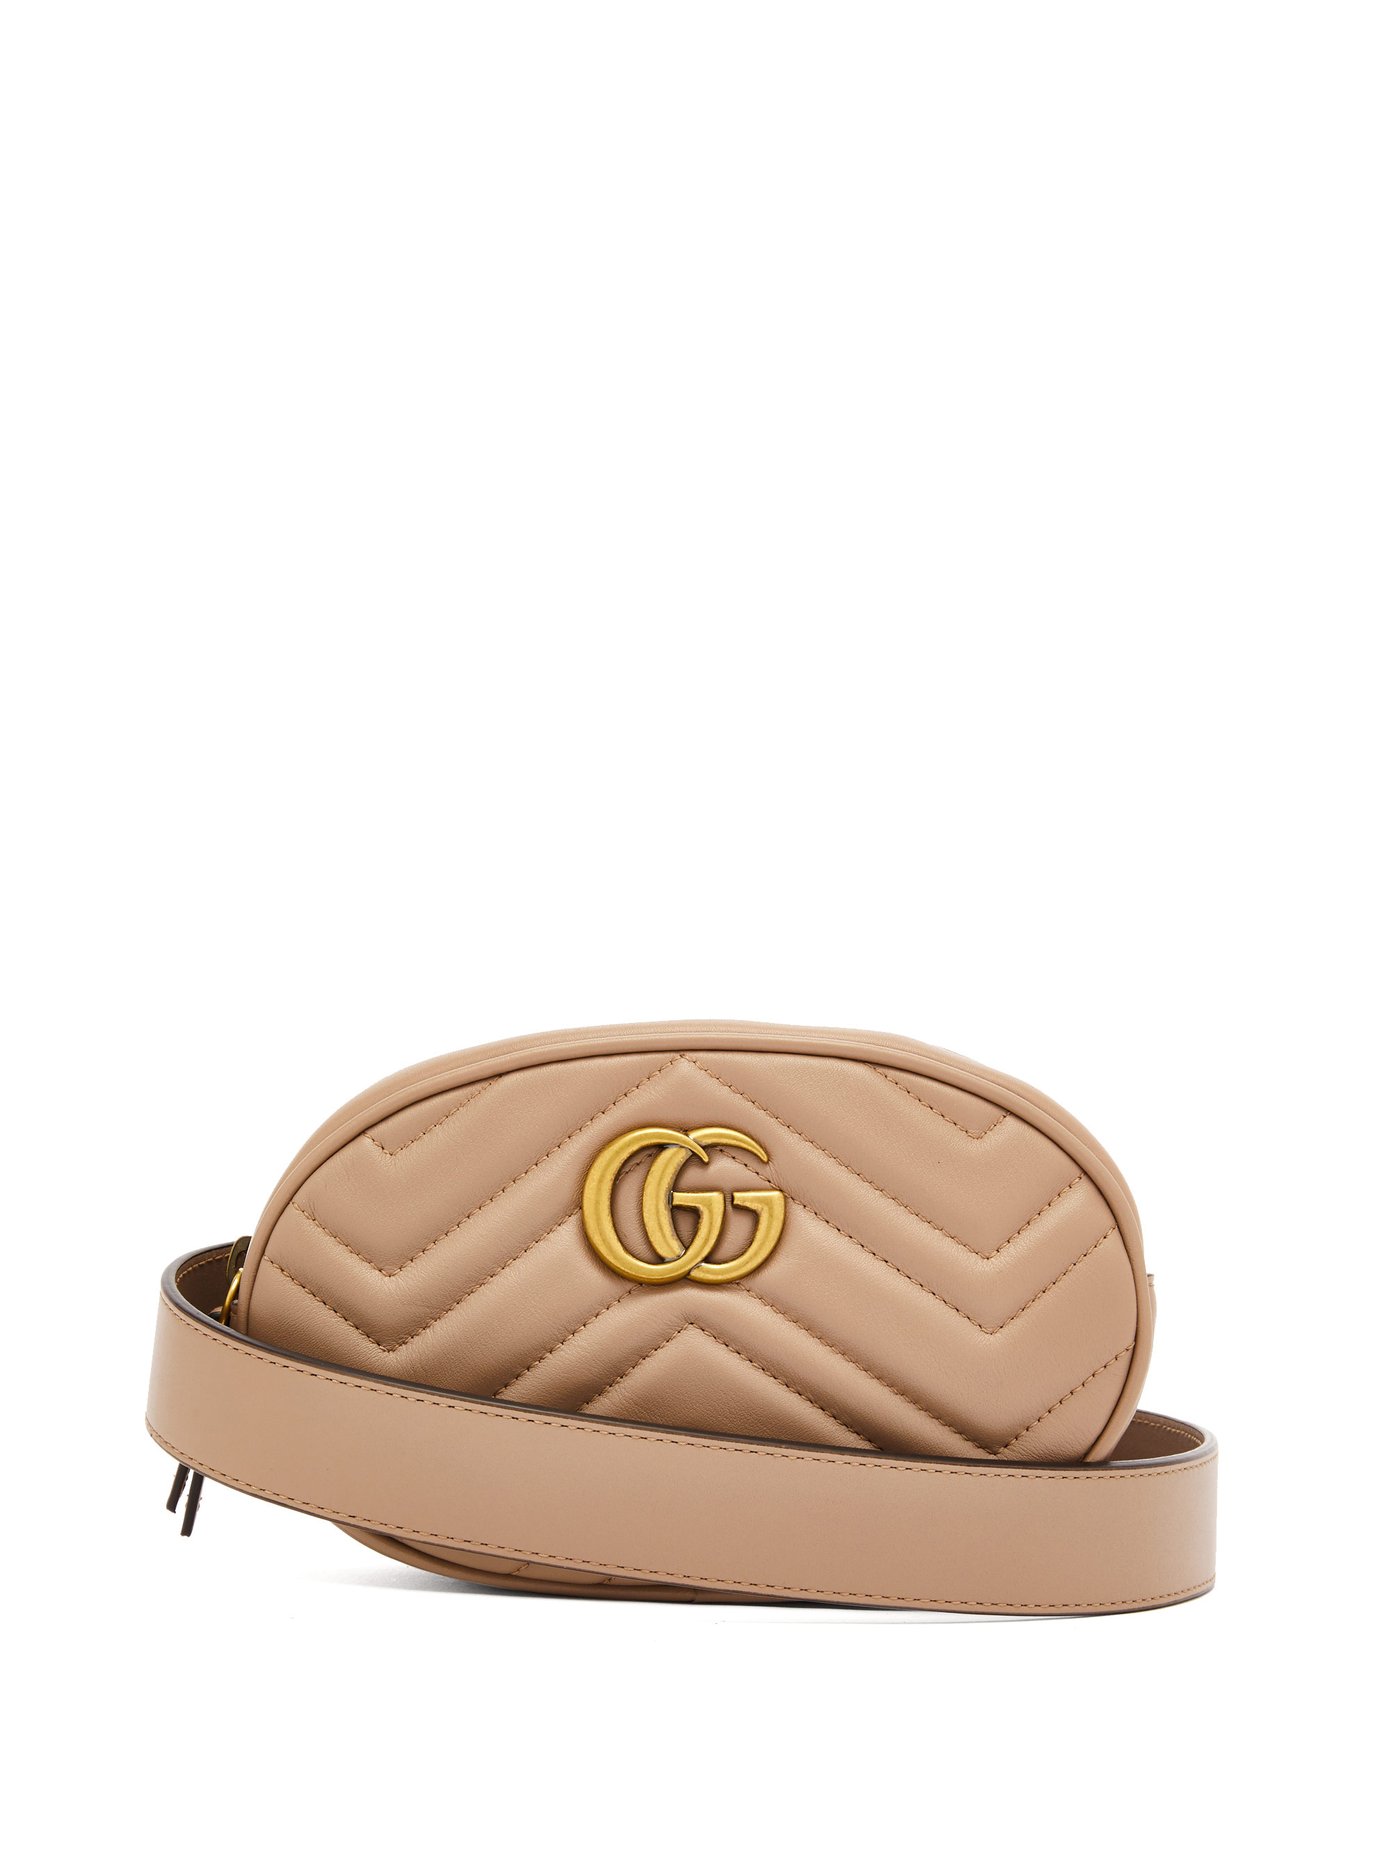 GG Marmont quilted-leather belt bag 